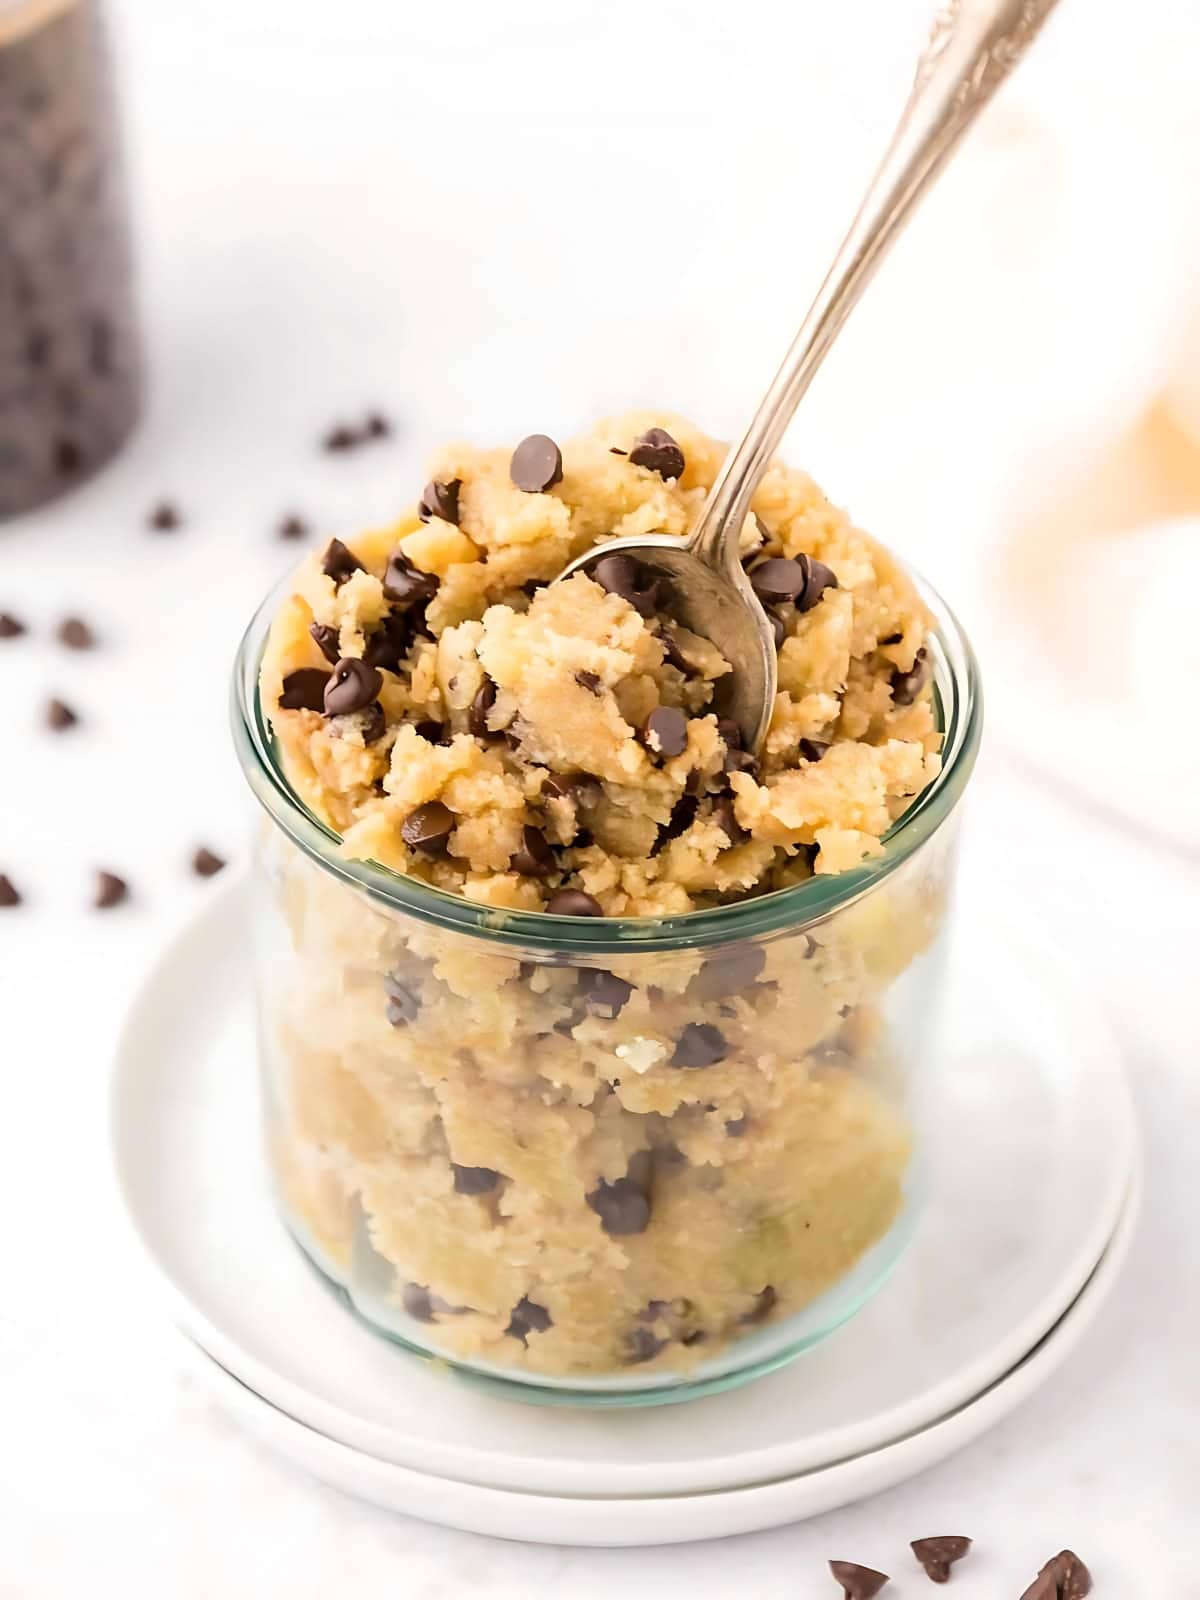 Edible cookie dough in a glass with chocolate chip toppings.